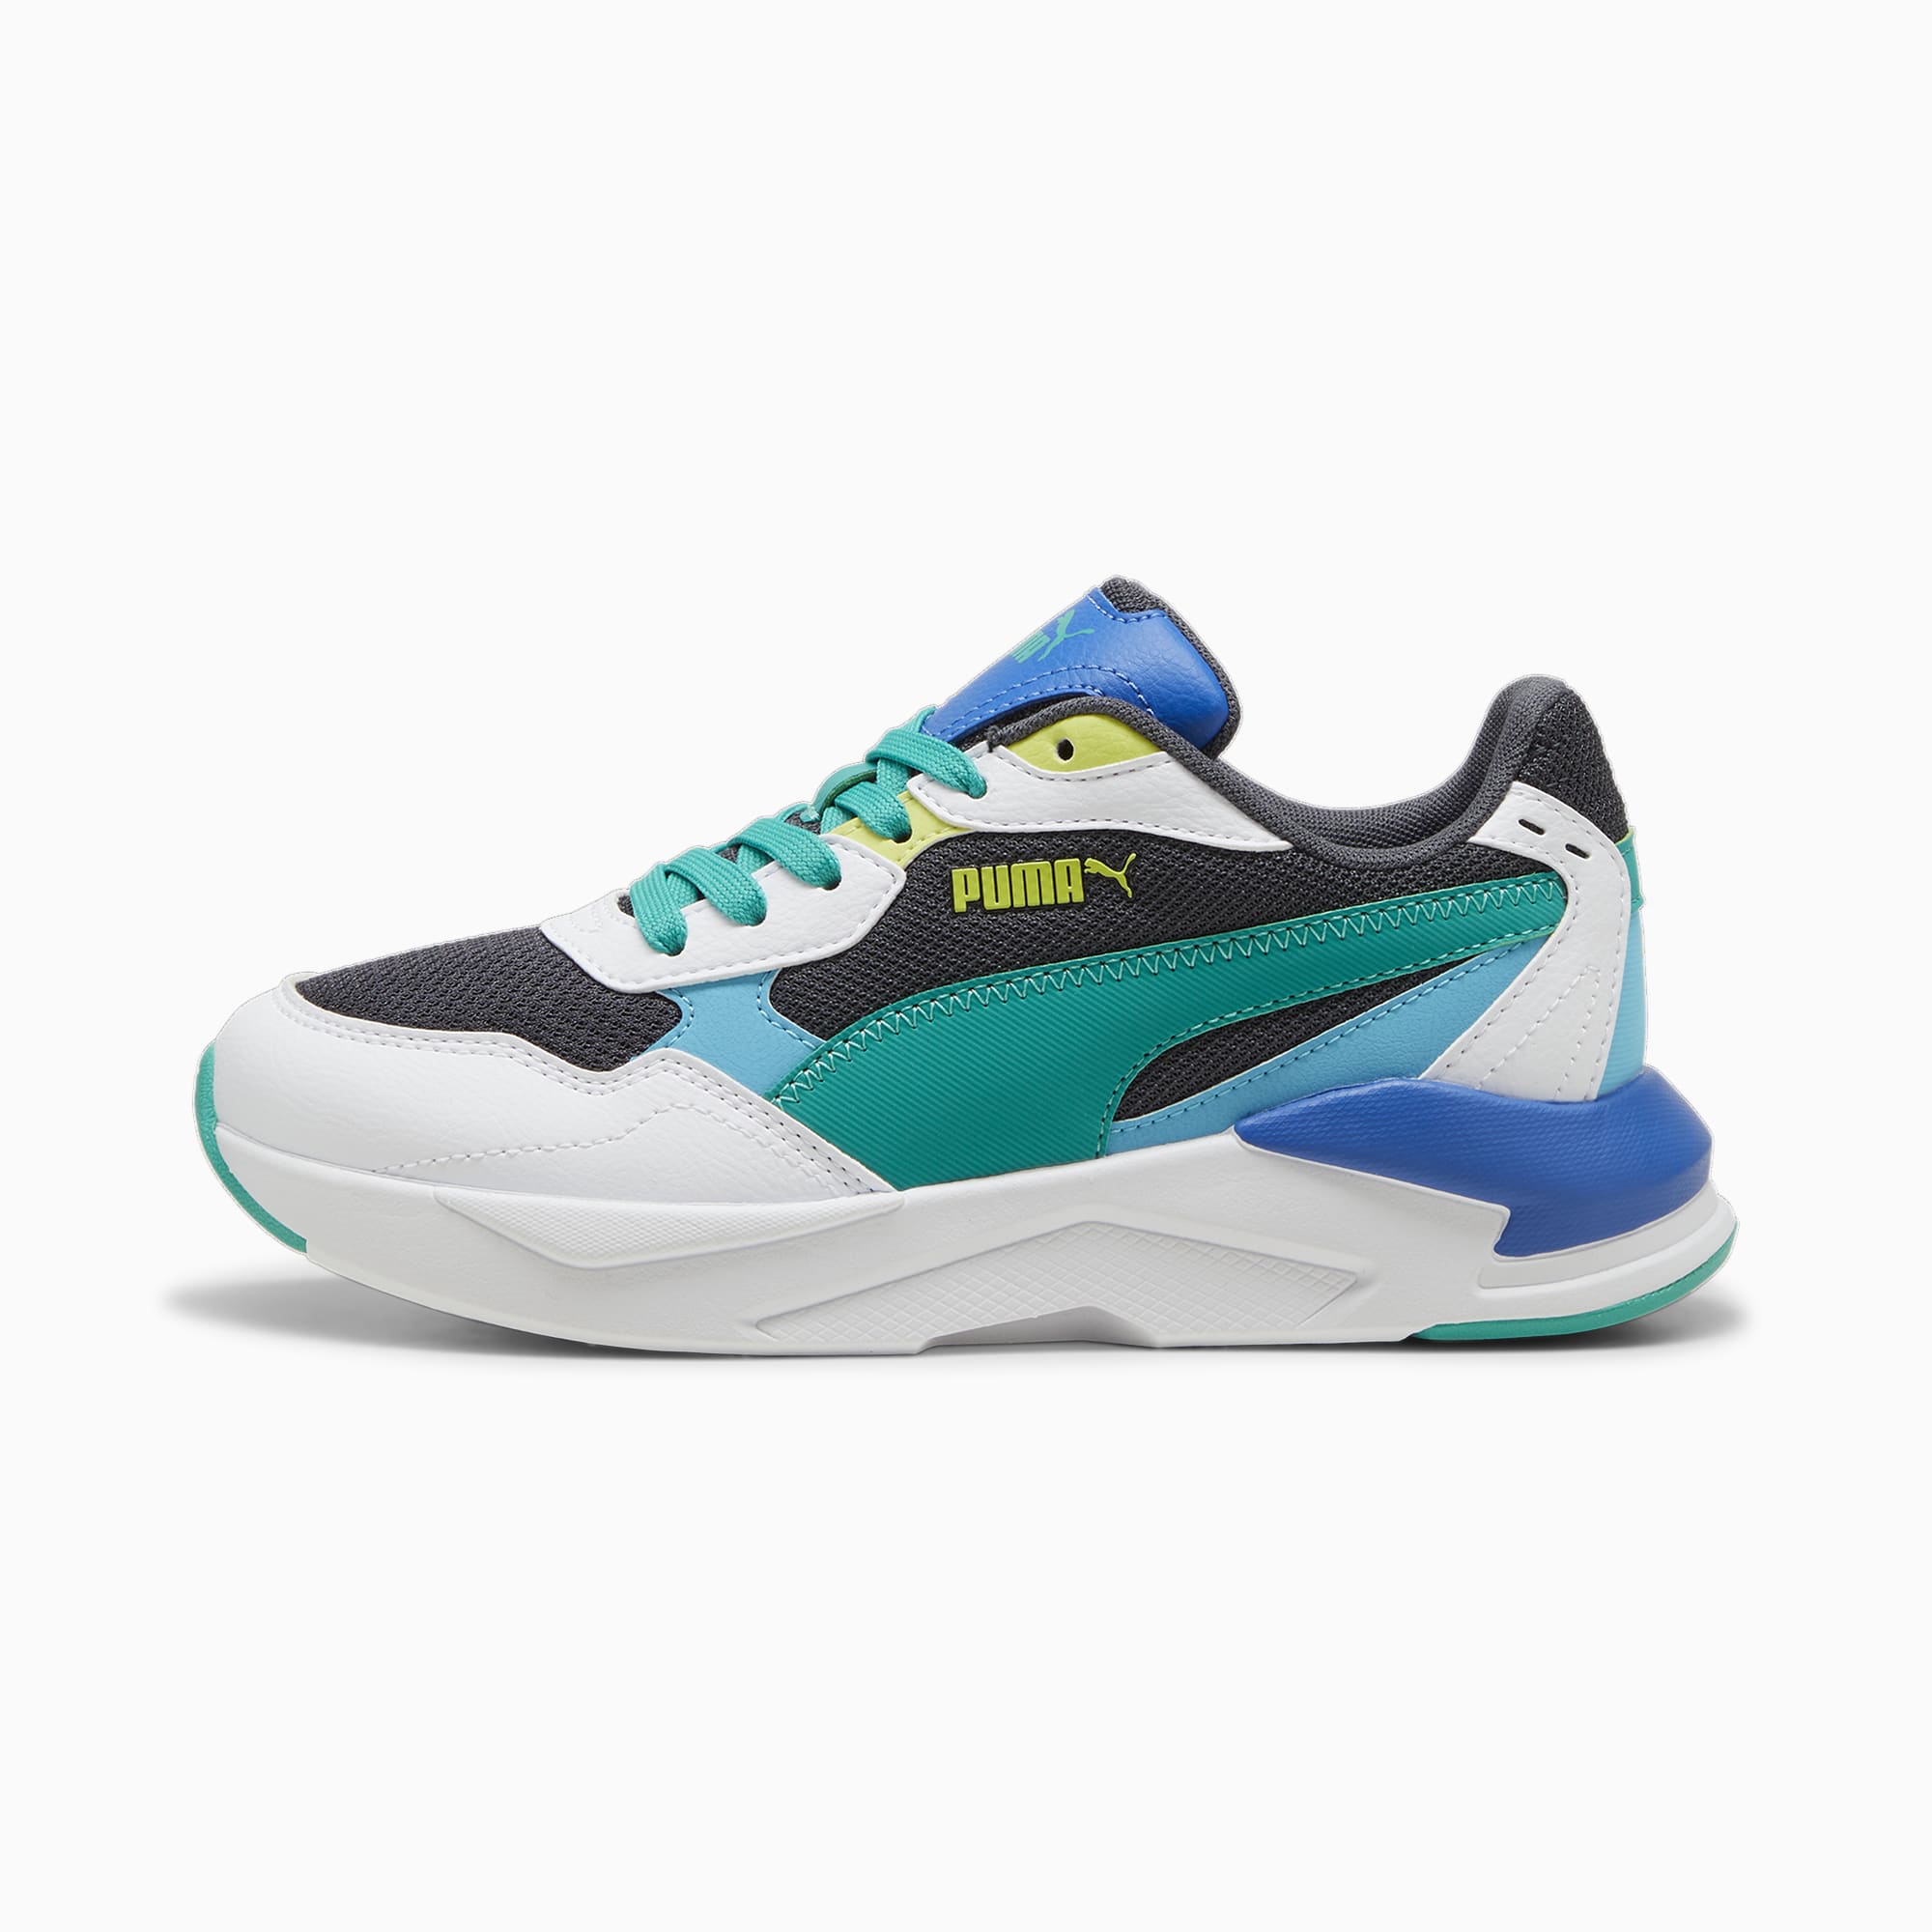 PUMA X-Ray Speed Lite Youth Trainers, Strongray/Sparkling Green/White, Size 35,5, Shoes